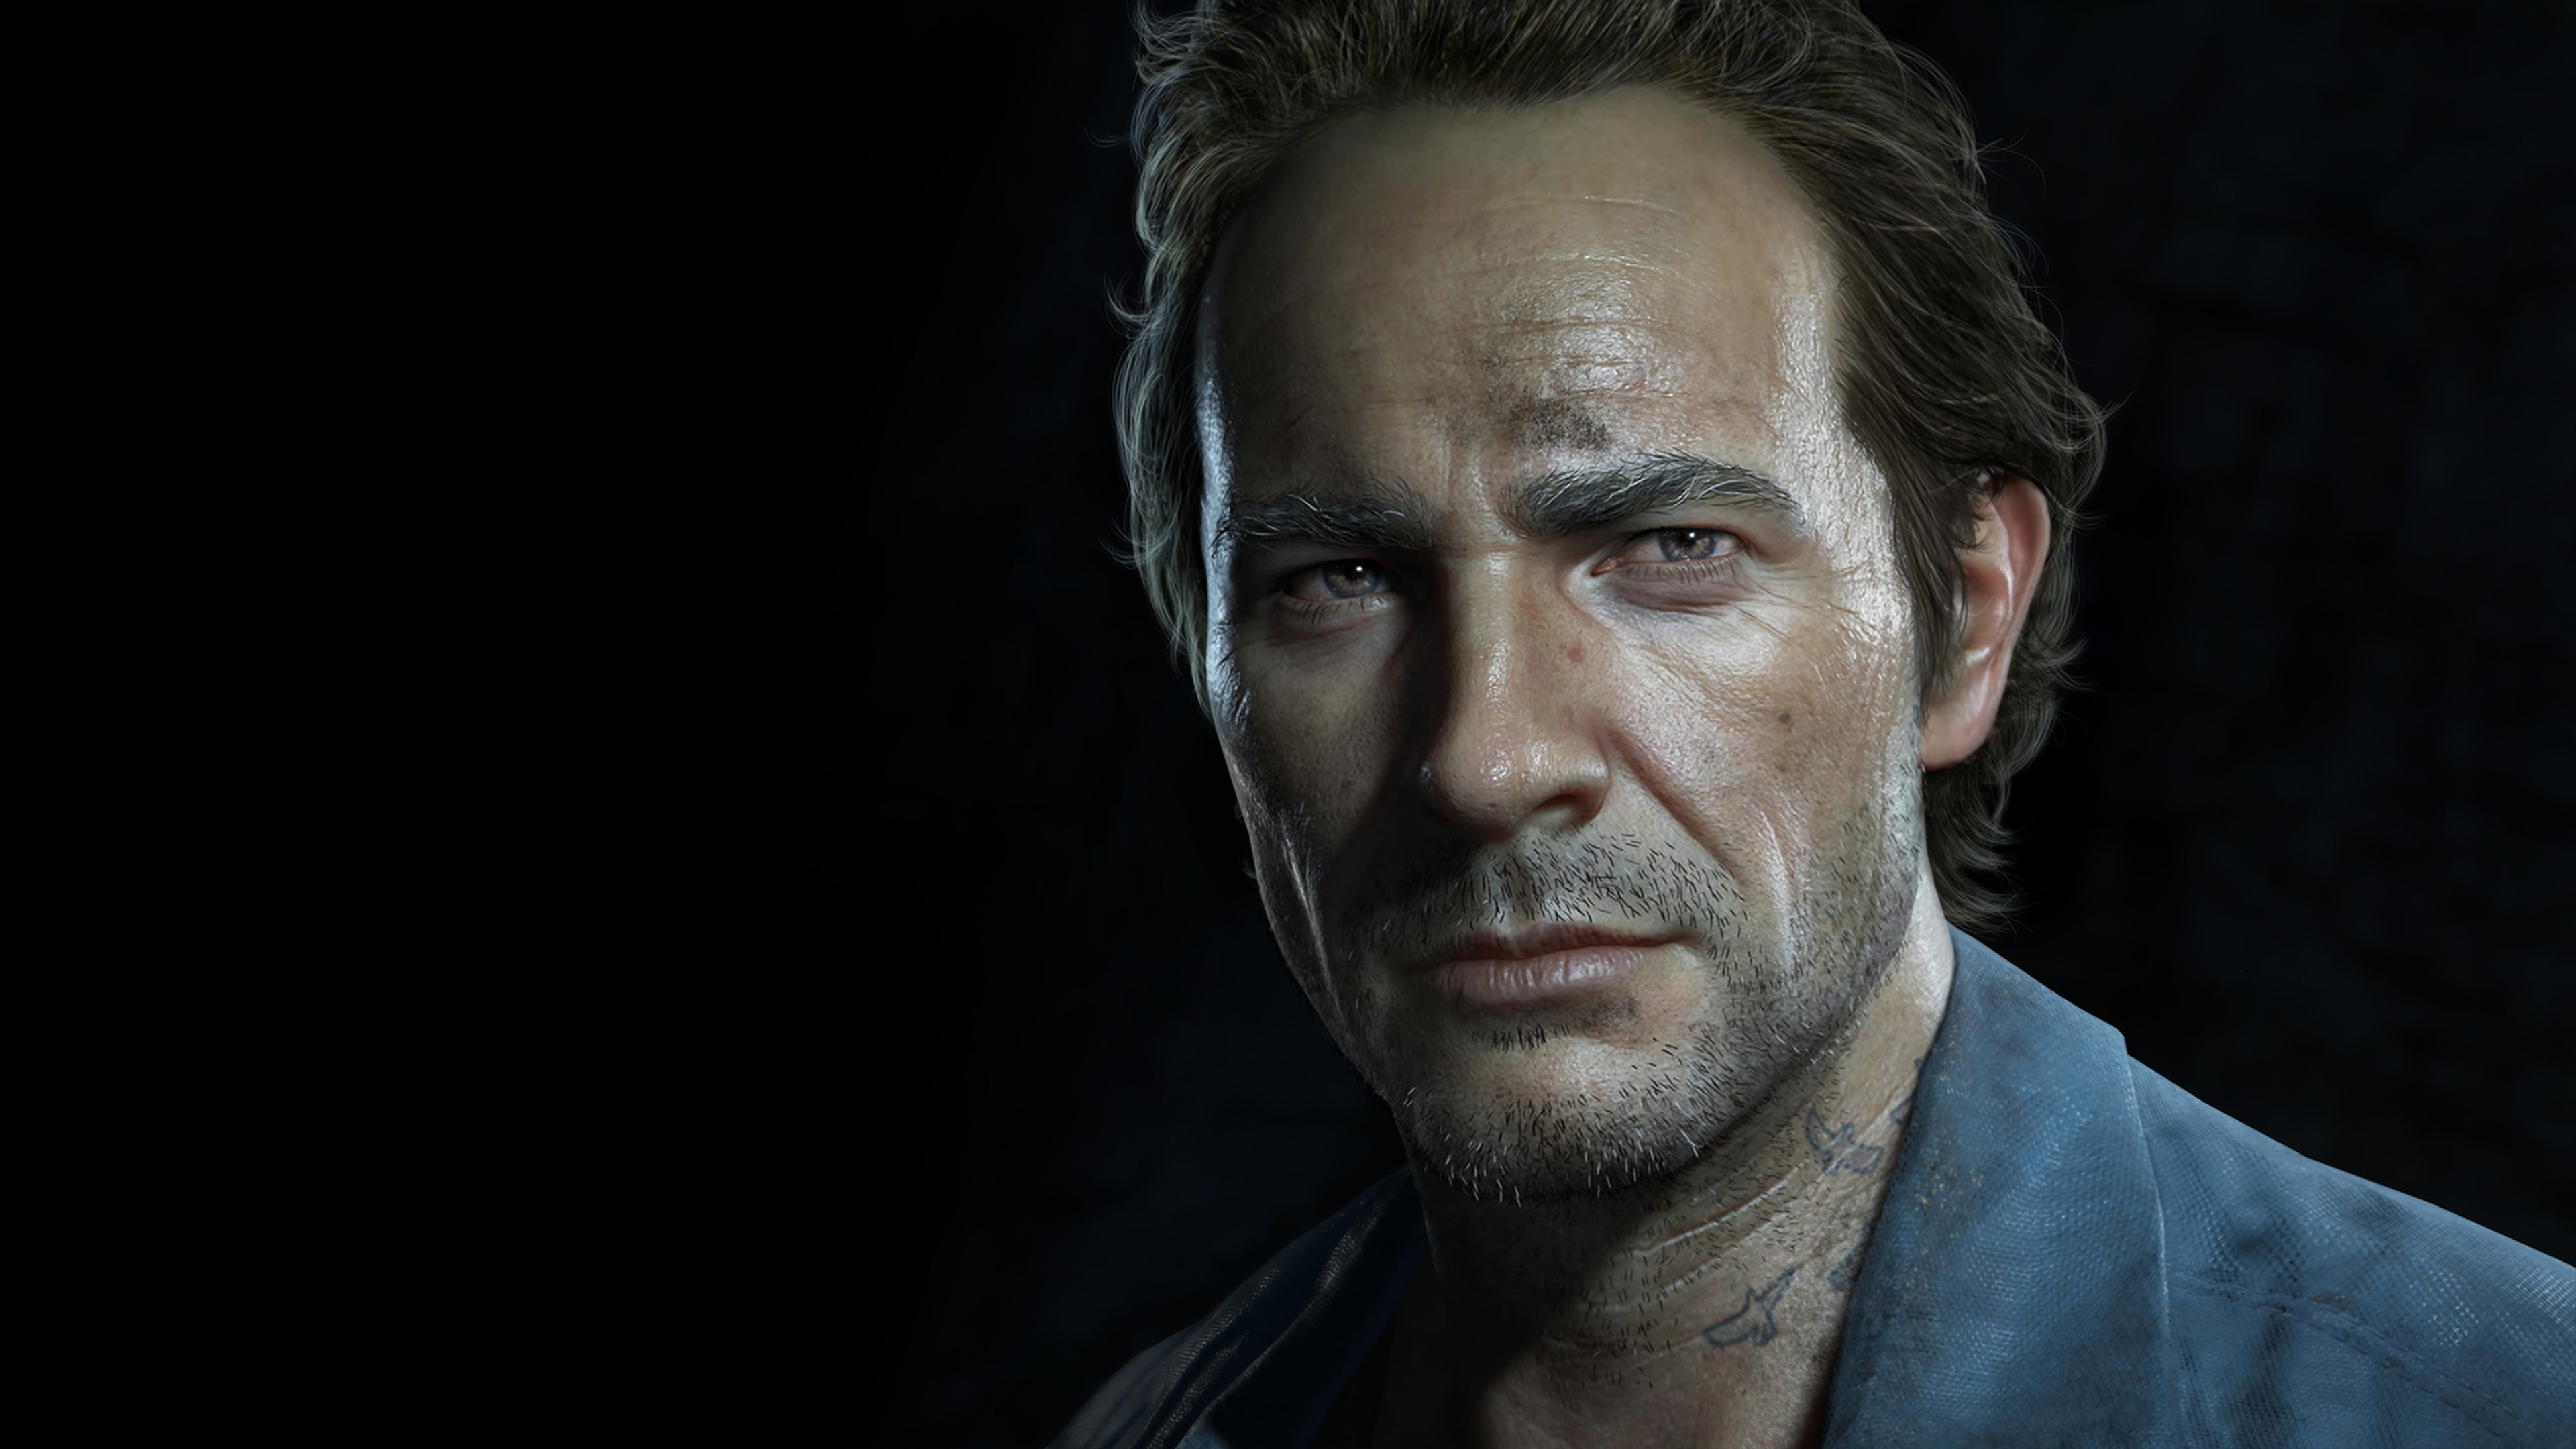 uncharted, Uncharted 4: A Thief's End, Samuel Drake, headshot